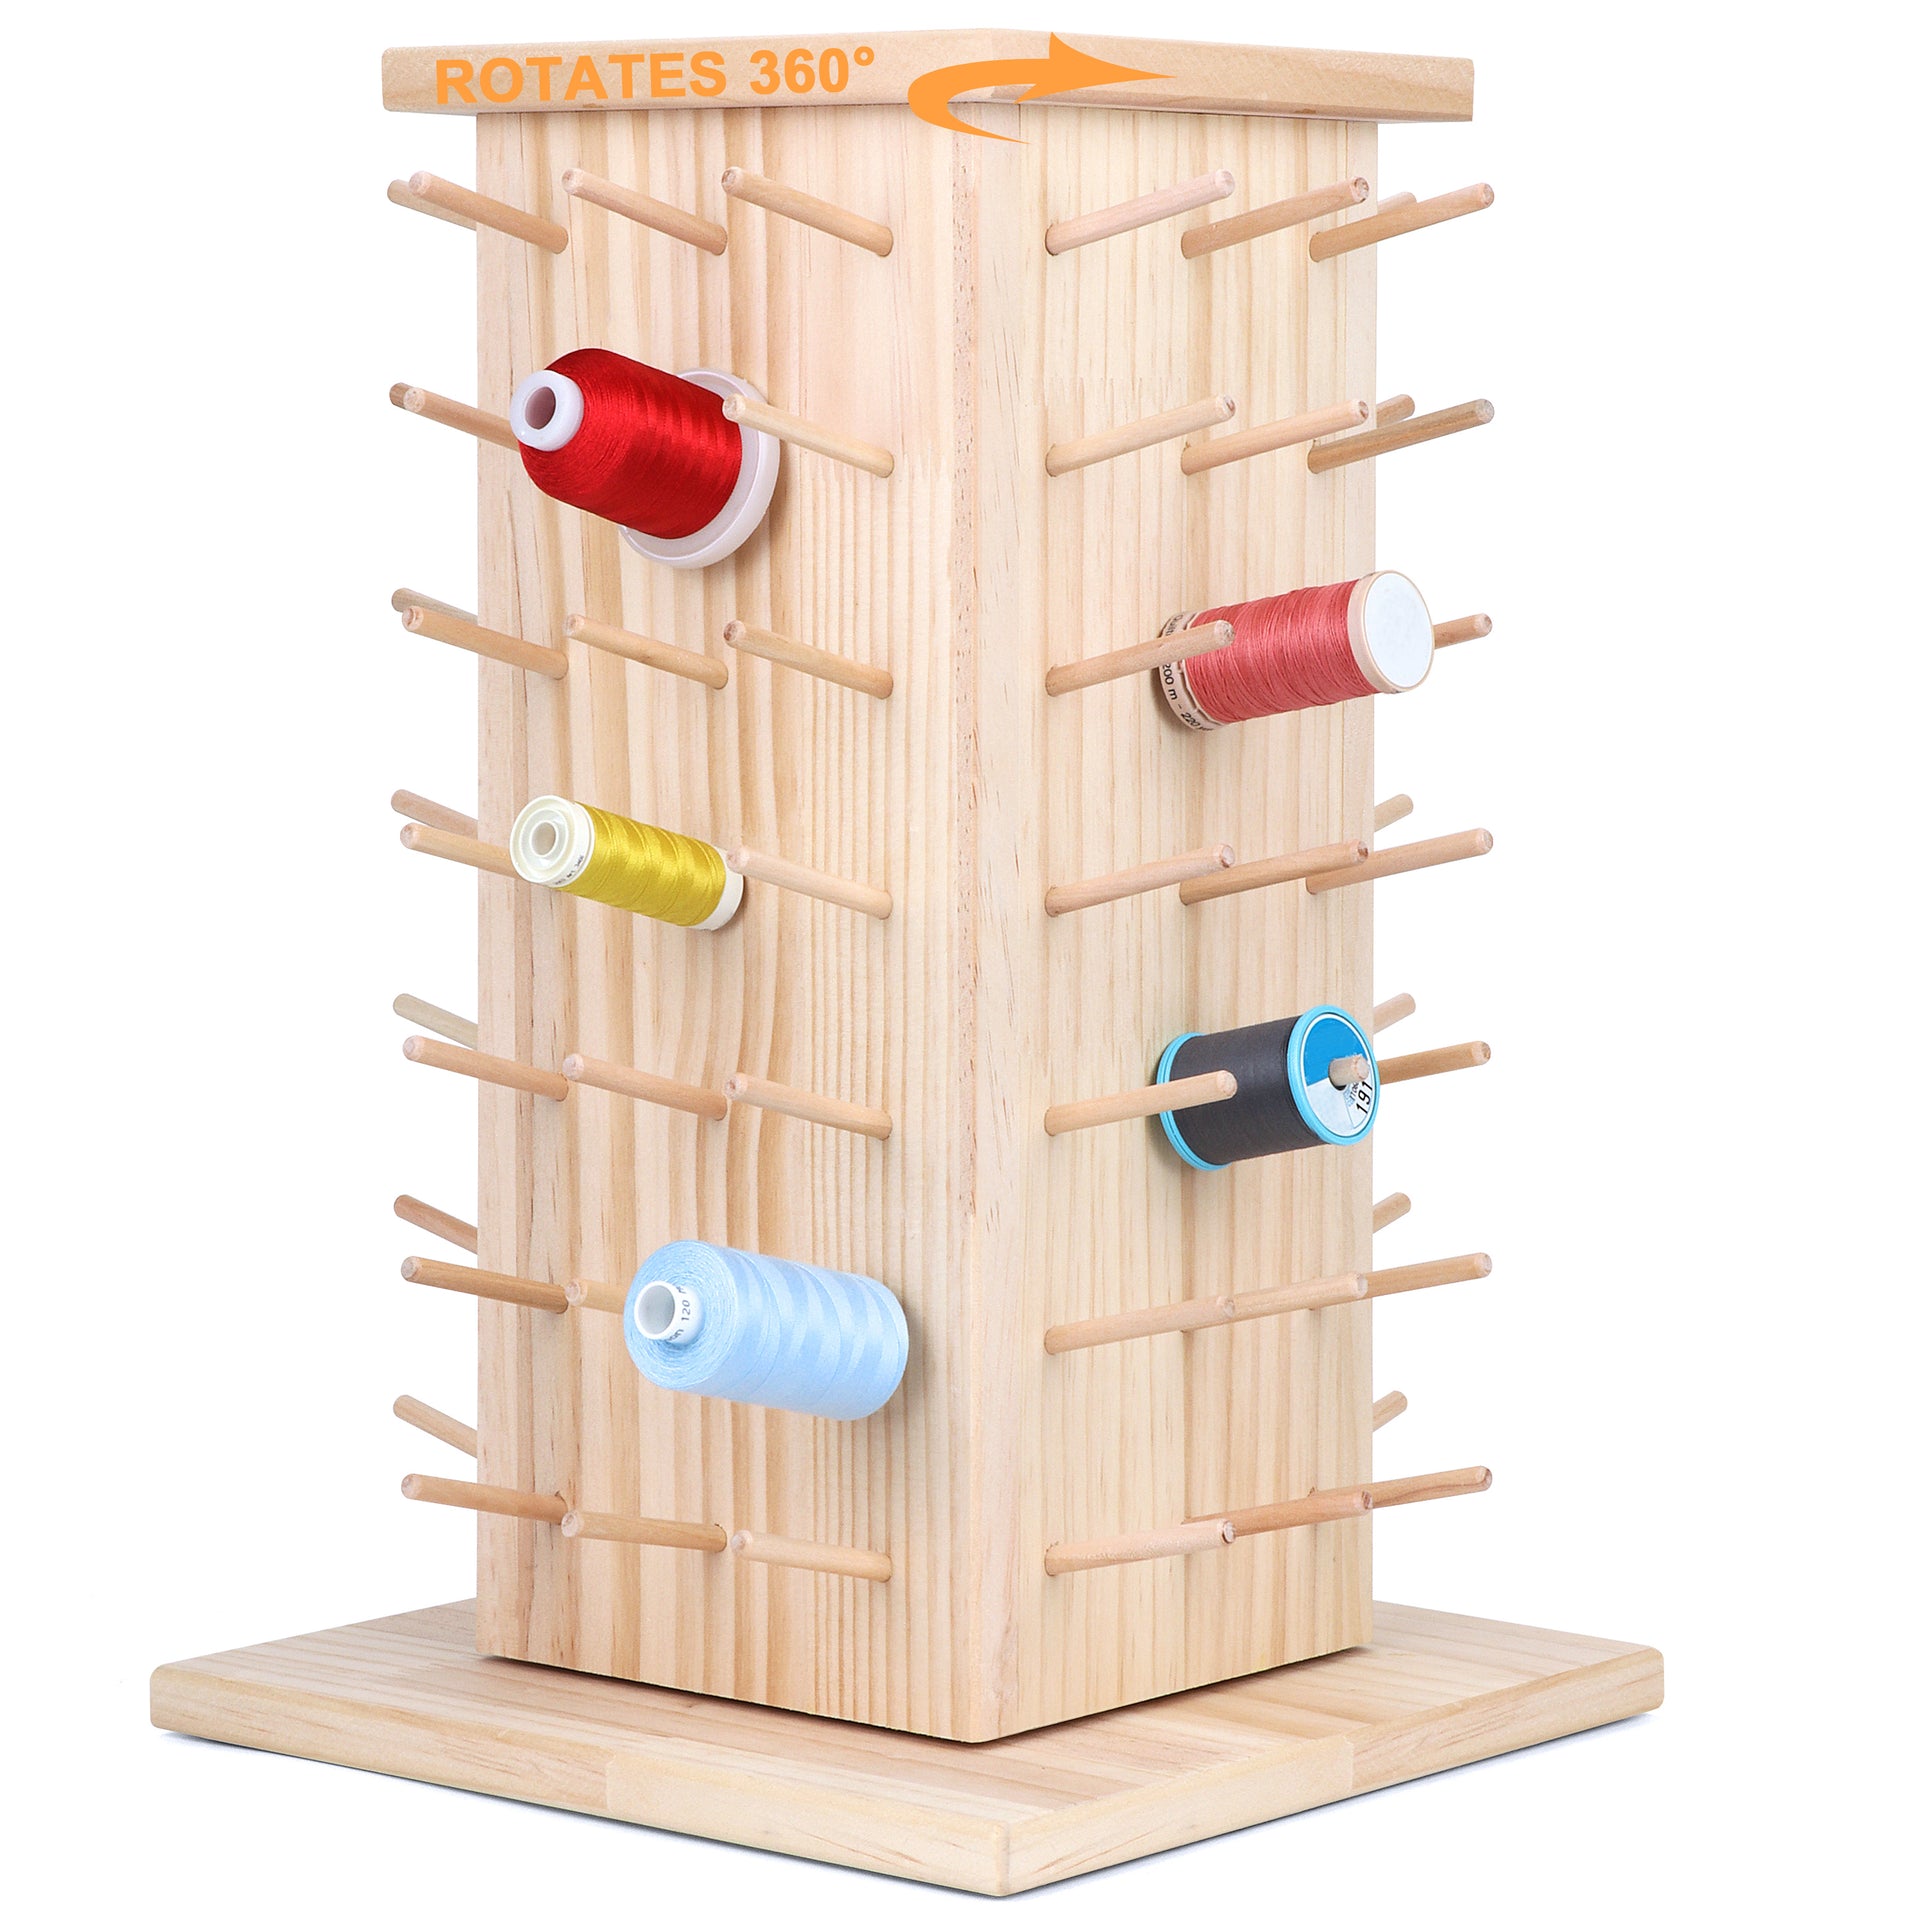 New Brothread 60 Spools Wooden Thread Rack/Thread Holder Organizer with  Hanging Hooks for Embroidery Quilting and Sewing Threads